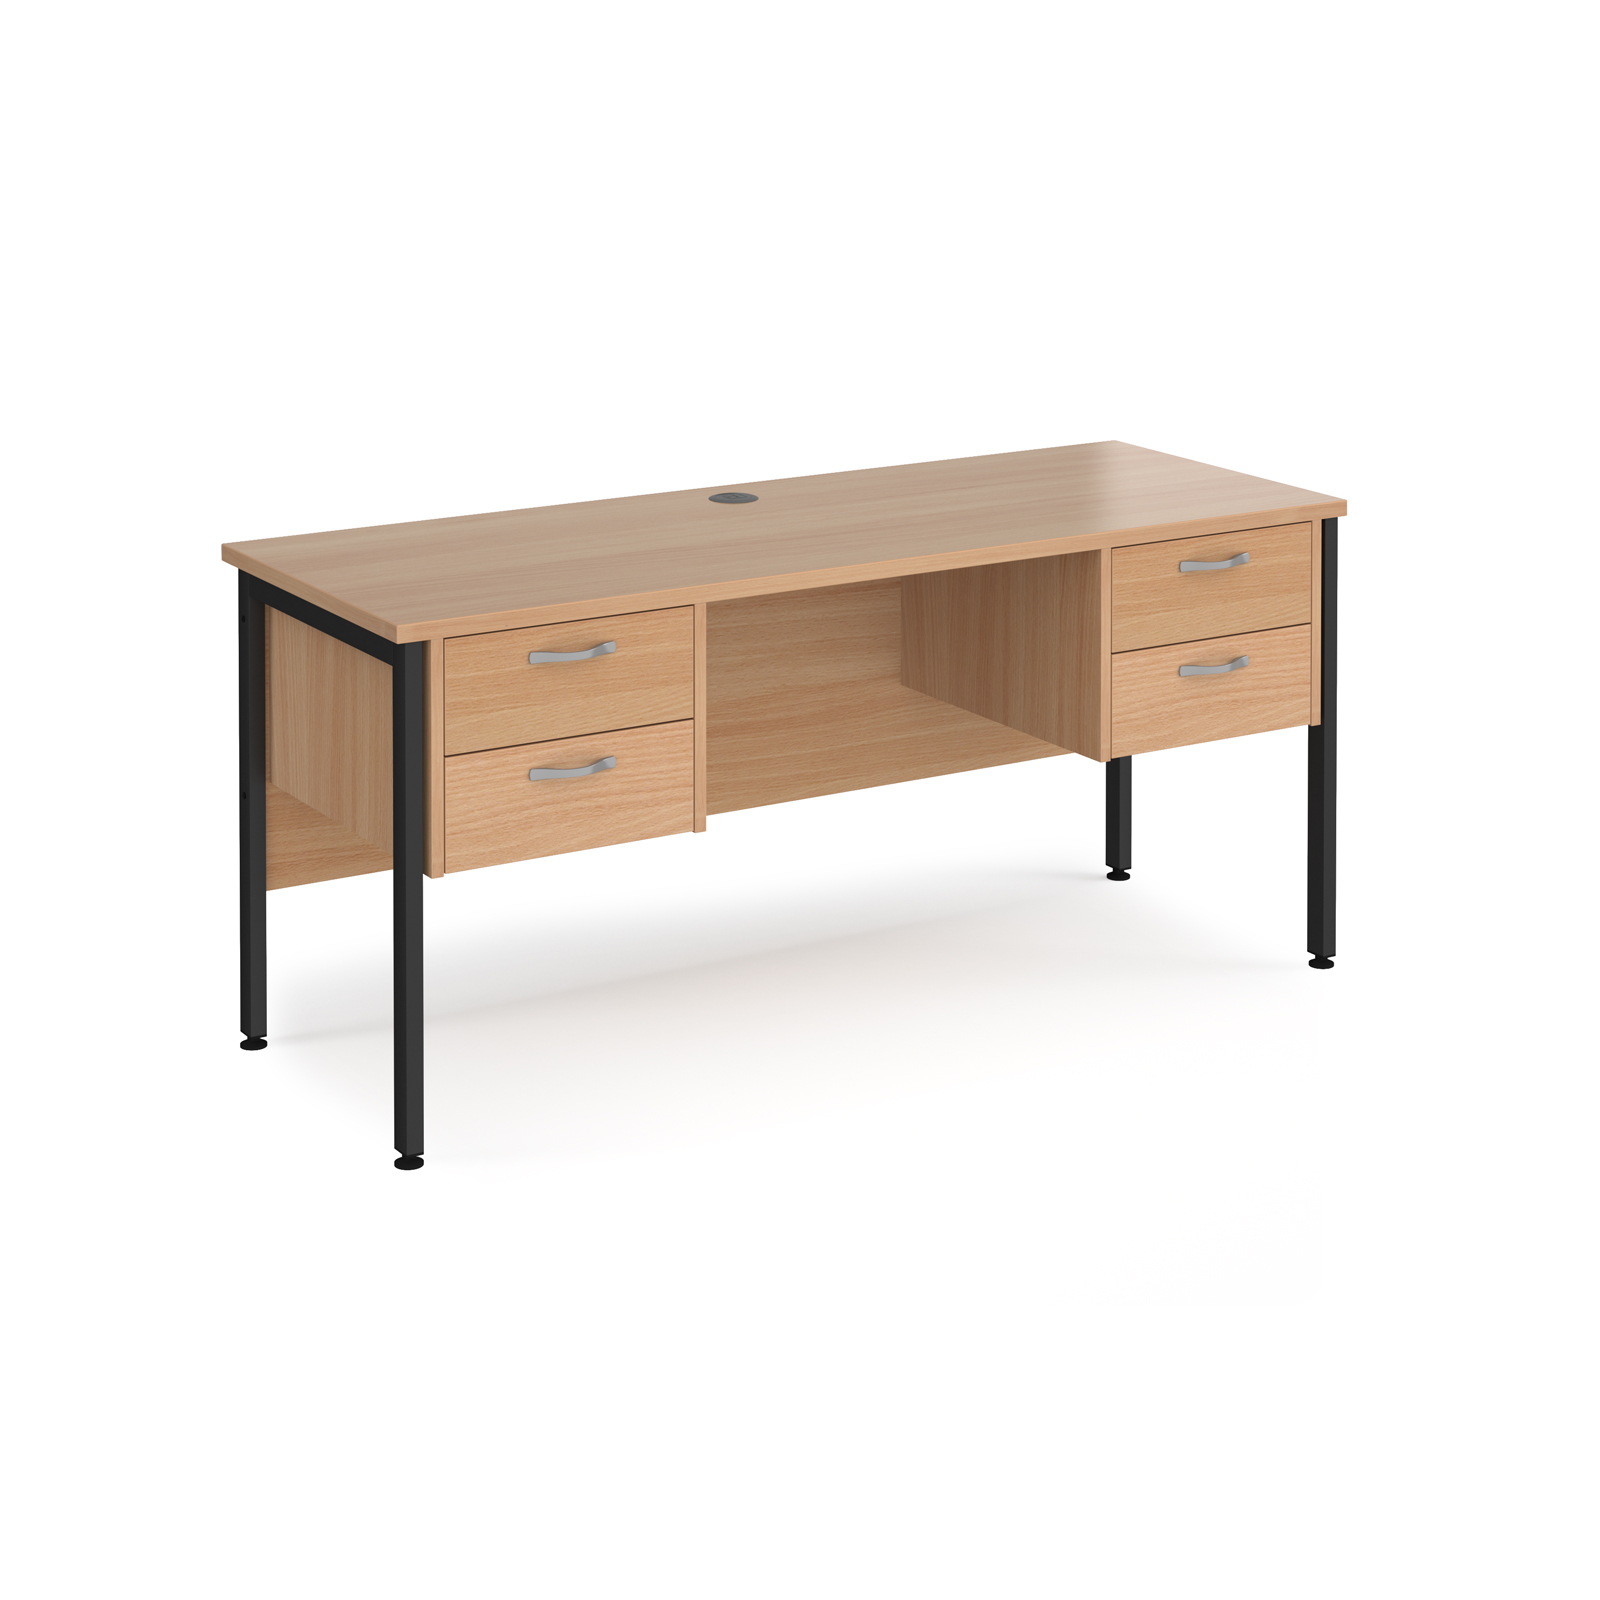 Maestro 25 straight desk 1600mm x 600mm with two x 2 drawer pedestals - black H-frame leg, beech top